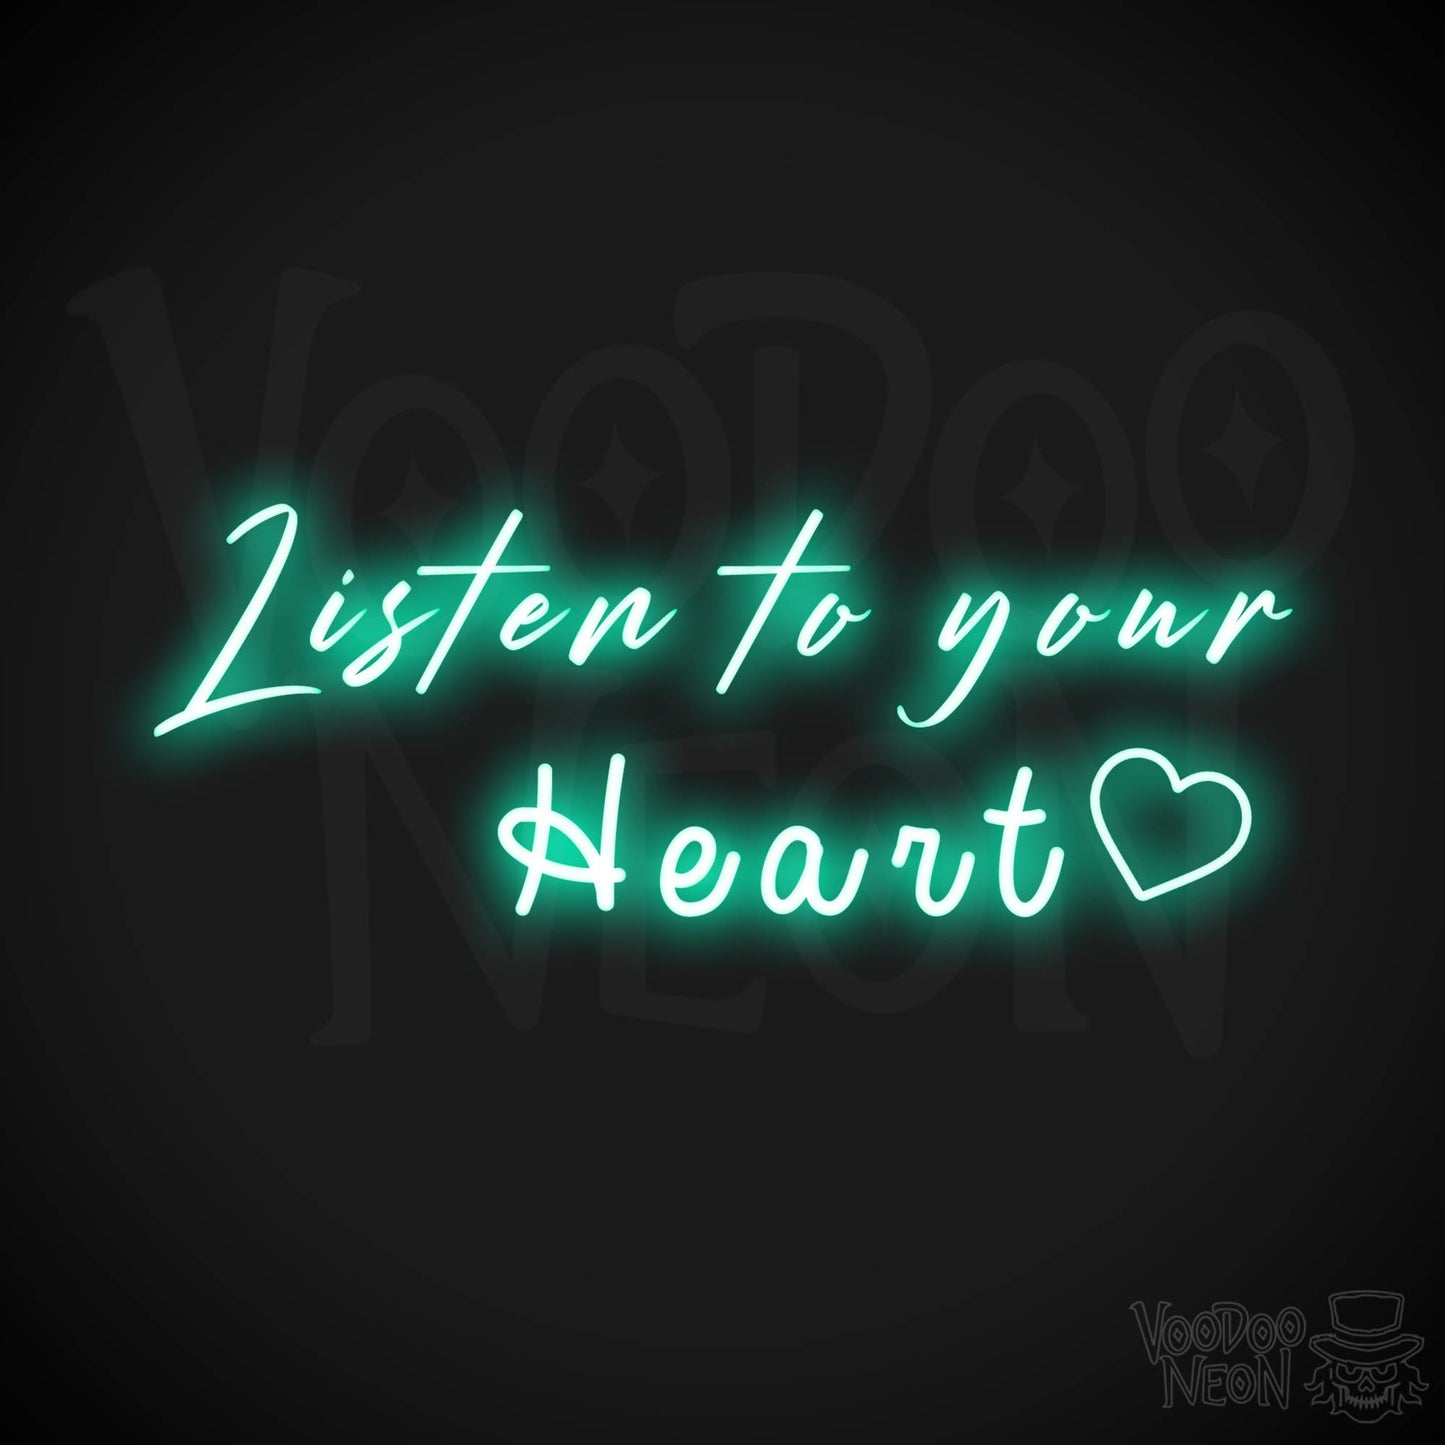 Listen To Your Heart Neon Sign - Neon Listen To Your Heart Sign - Wedding Sign - Color Light Green